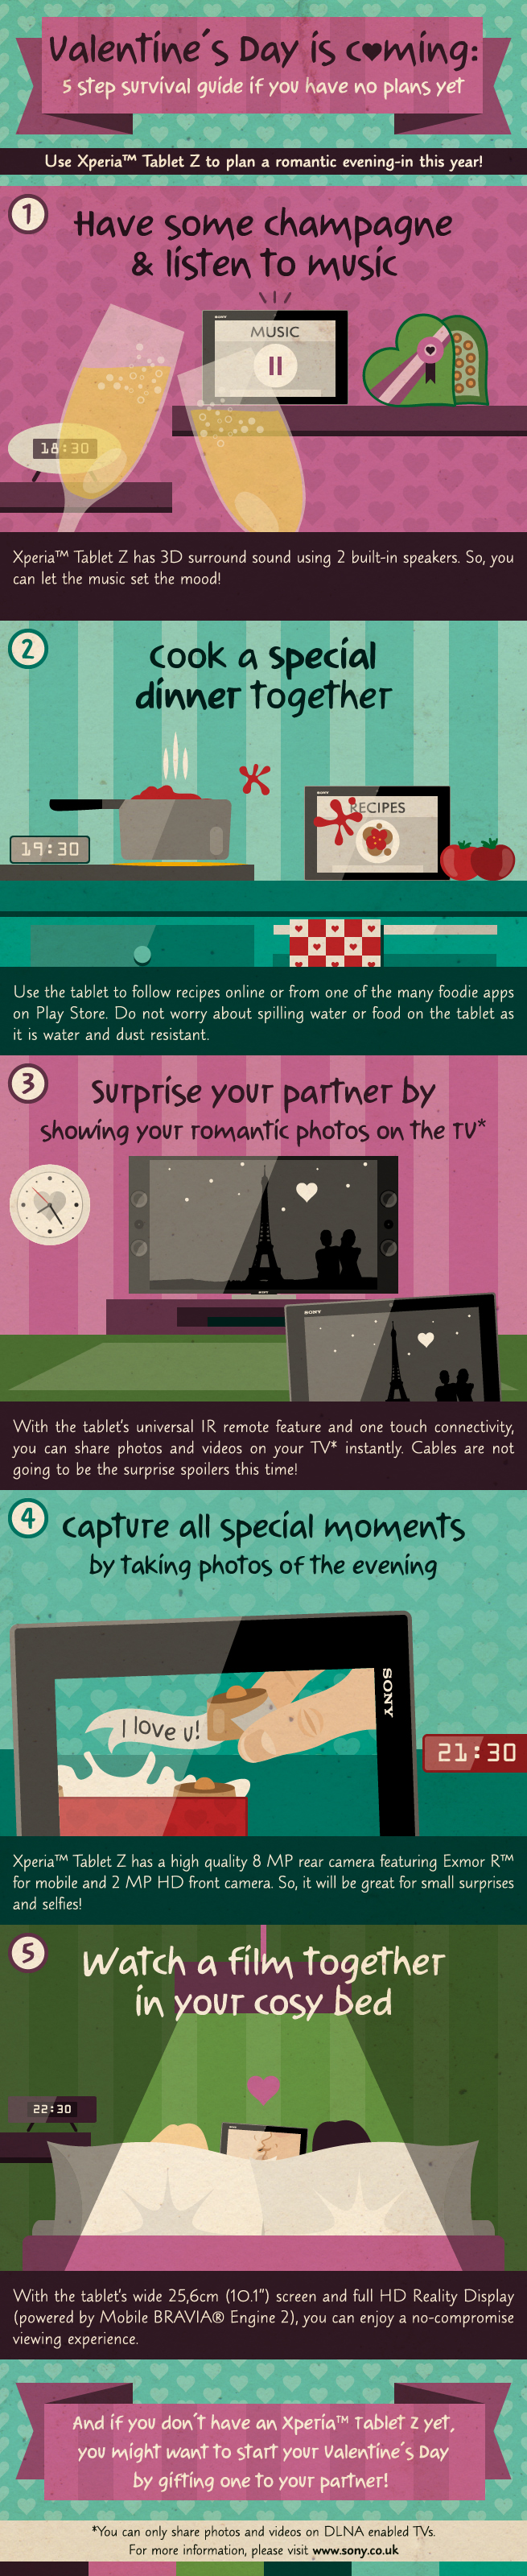 Valentine's Day survival guide - Infographic